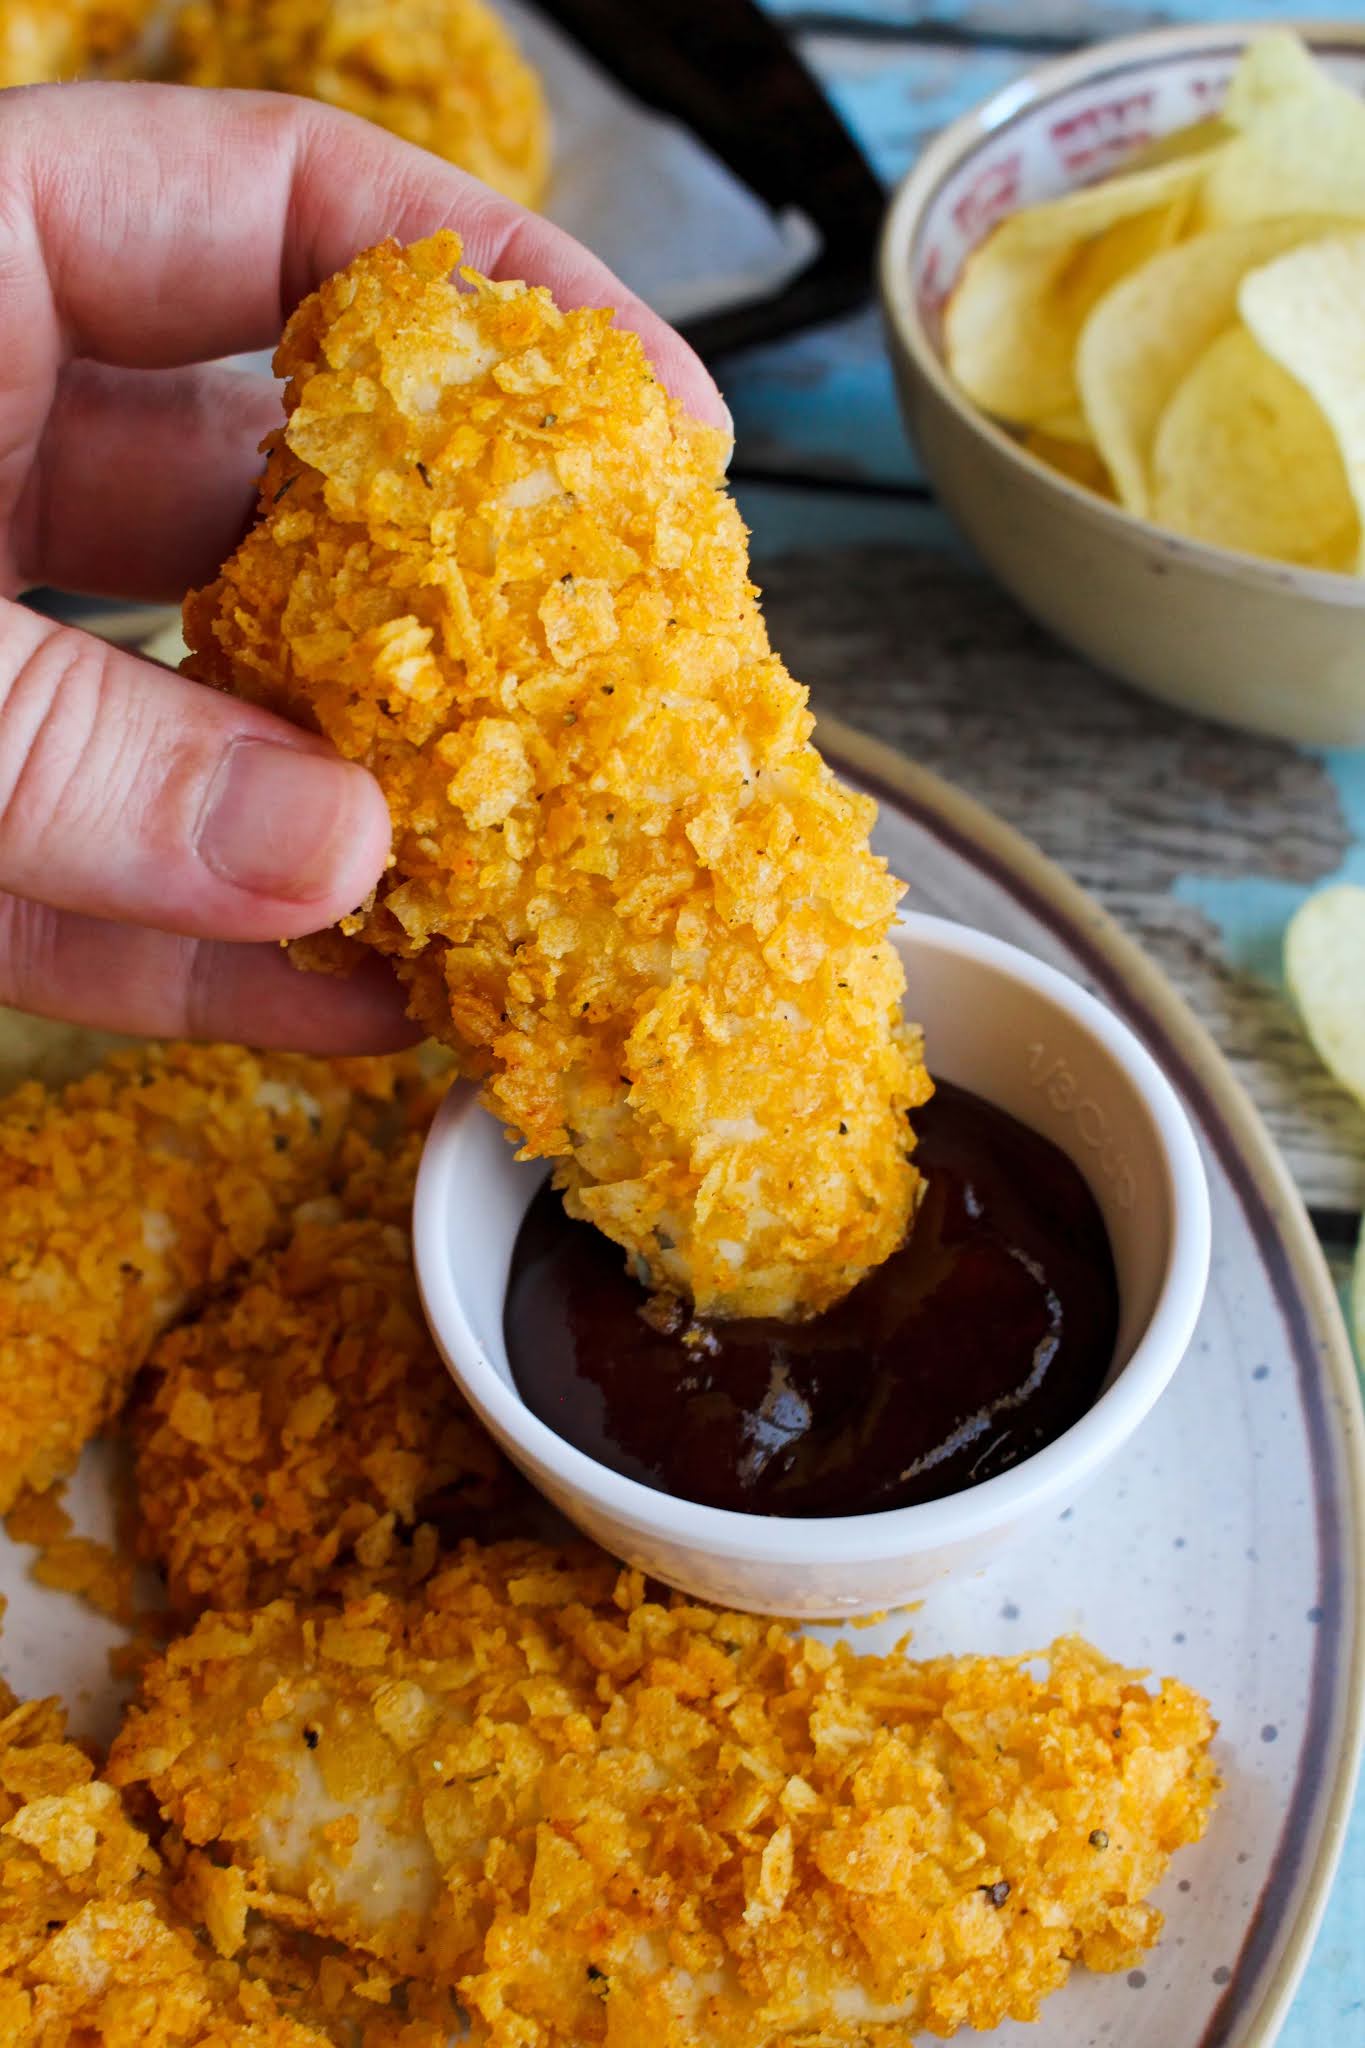 Side view of a hand dipping a Potato Chip Chicken Tender into a side of barbecue sauce.